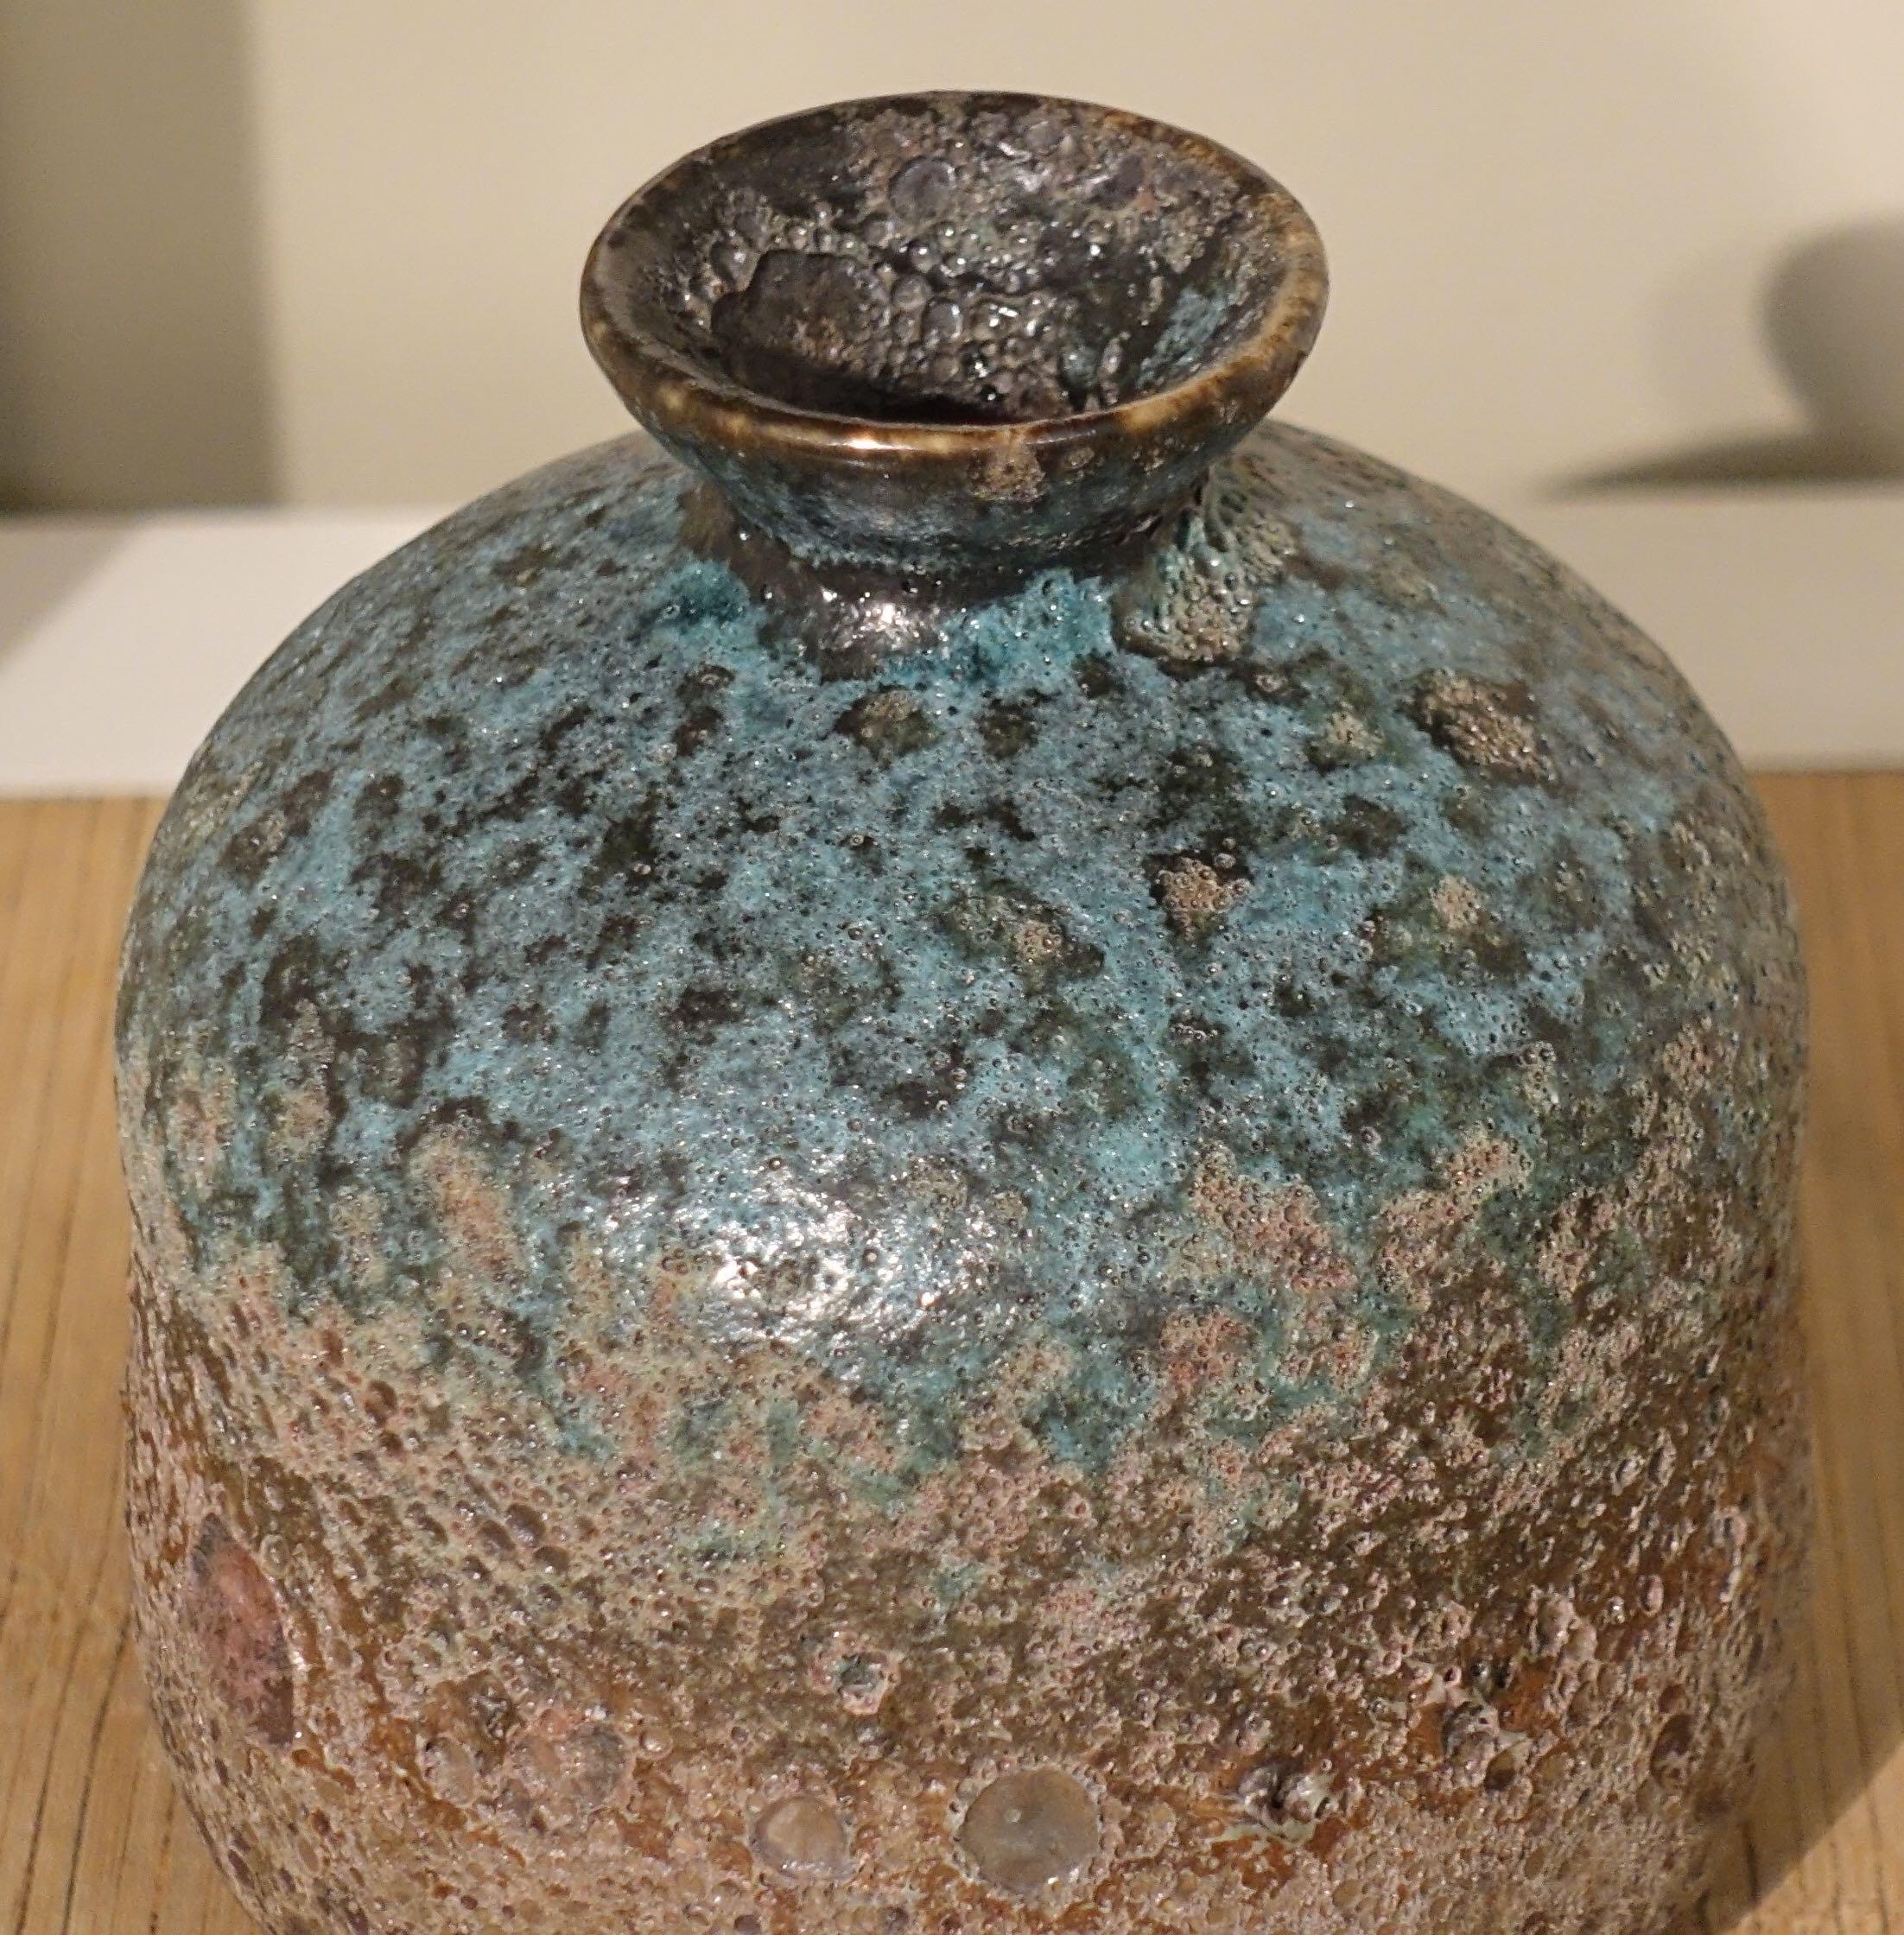 Contemporary Chinese textured volcanic glaze vase with thin mouth
Sits well as part of a collection
S5142/3/4/5
